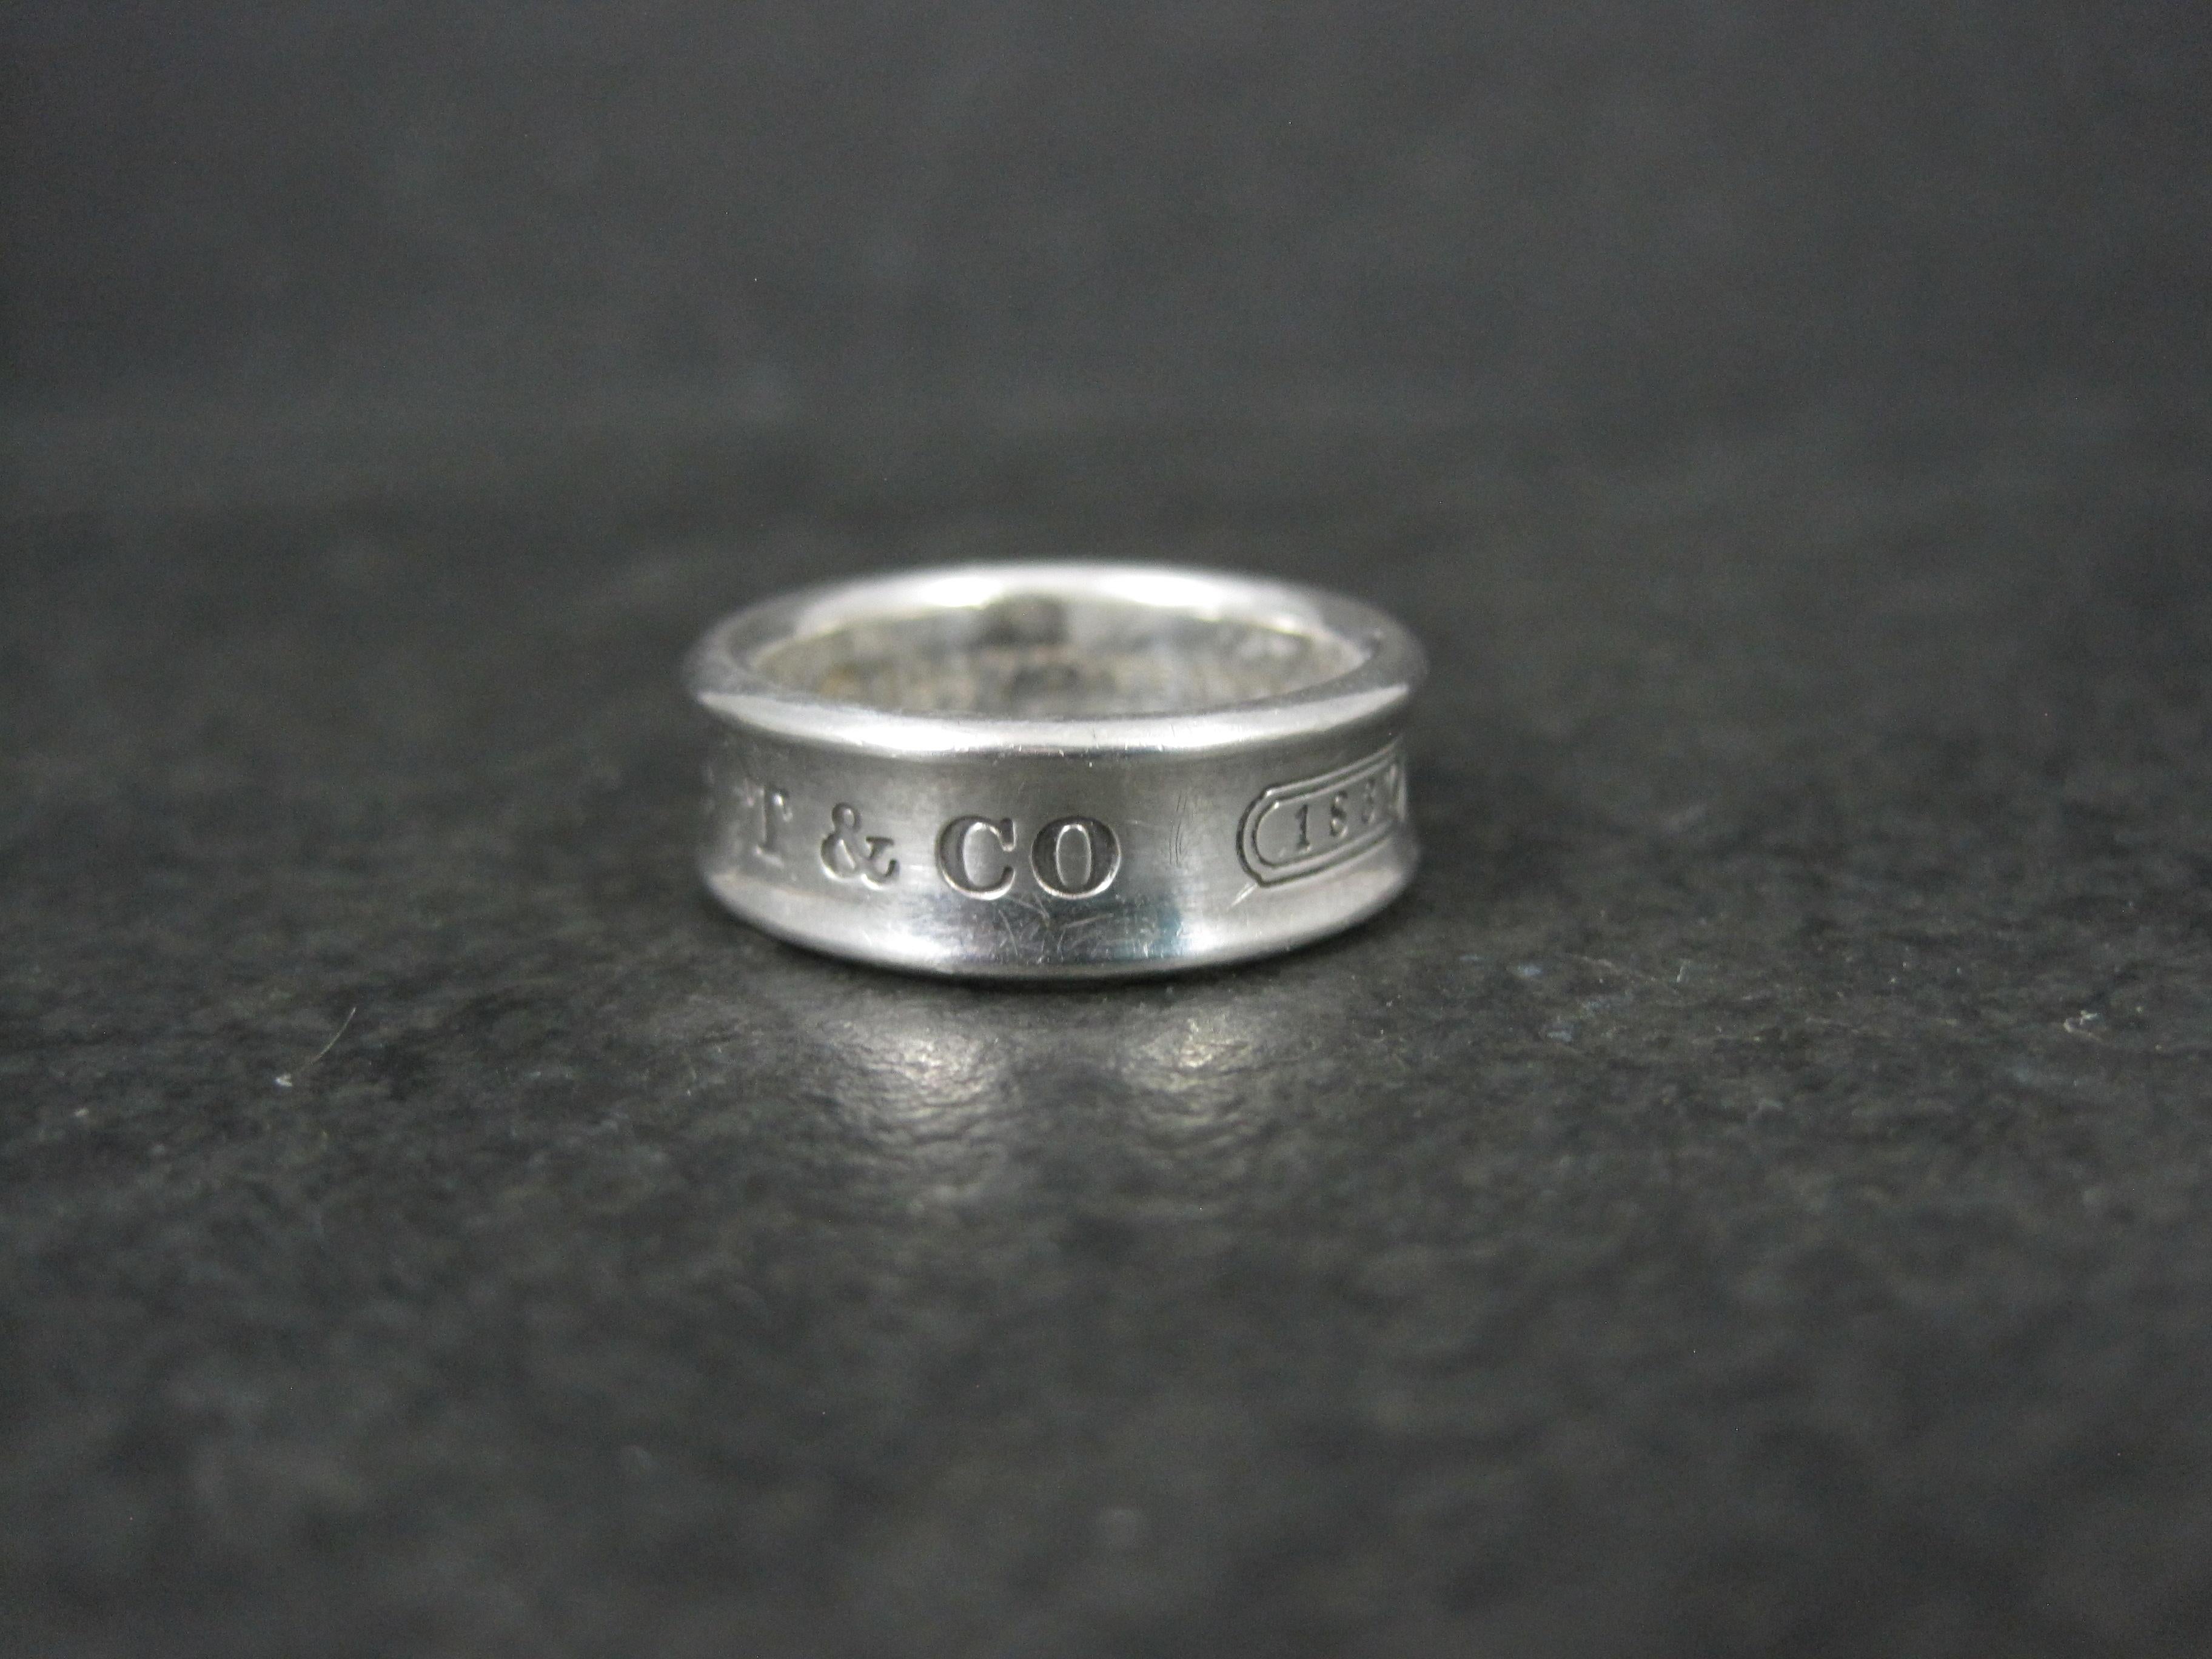 1997 Tiffany & Co 1837 Band Ring Sterling Silver Size 6.5 Unisexe en vente